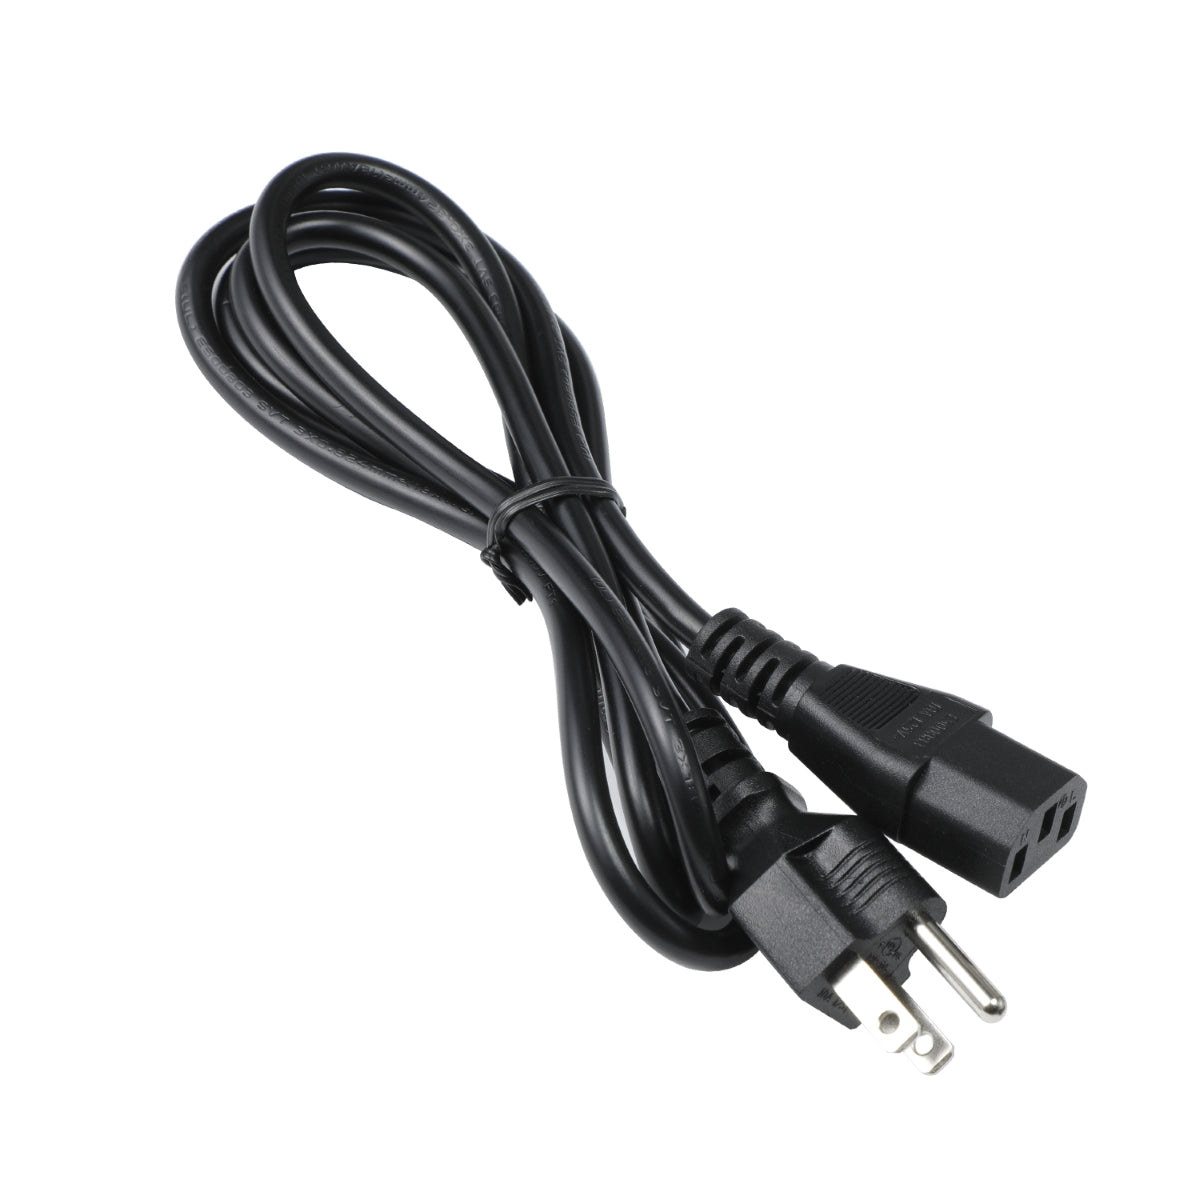 Power Cord for HP Pavilion 550-172 Computer.